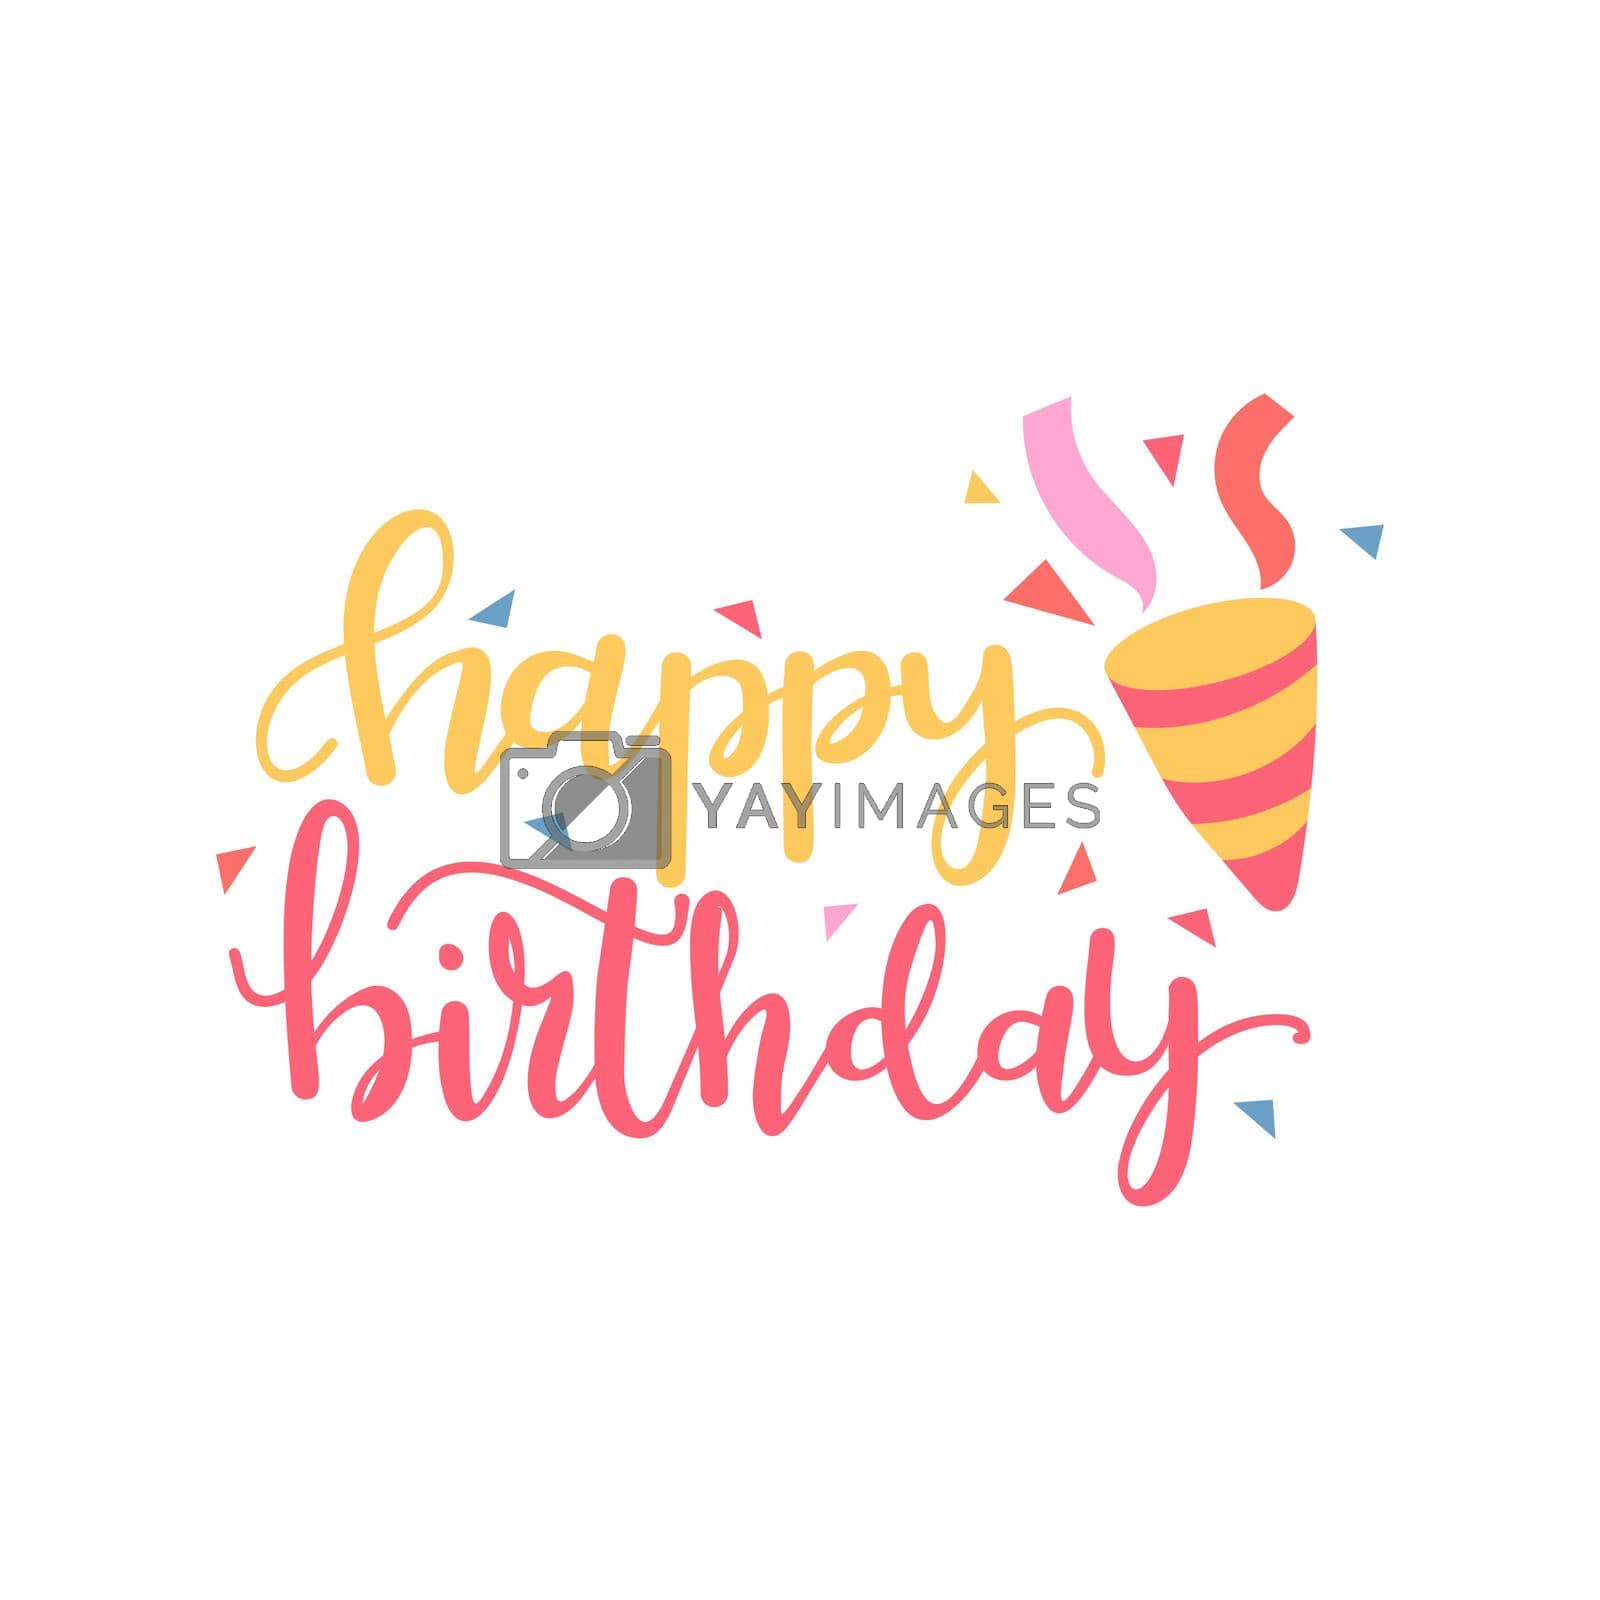 Royalty free image of Happy Birthday typographic vector design for greeting cards, Birthday card, invitation card. Isolated birthday text, lettering composition. Vector Illustration eps.10 by ANITA